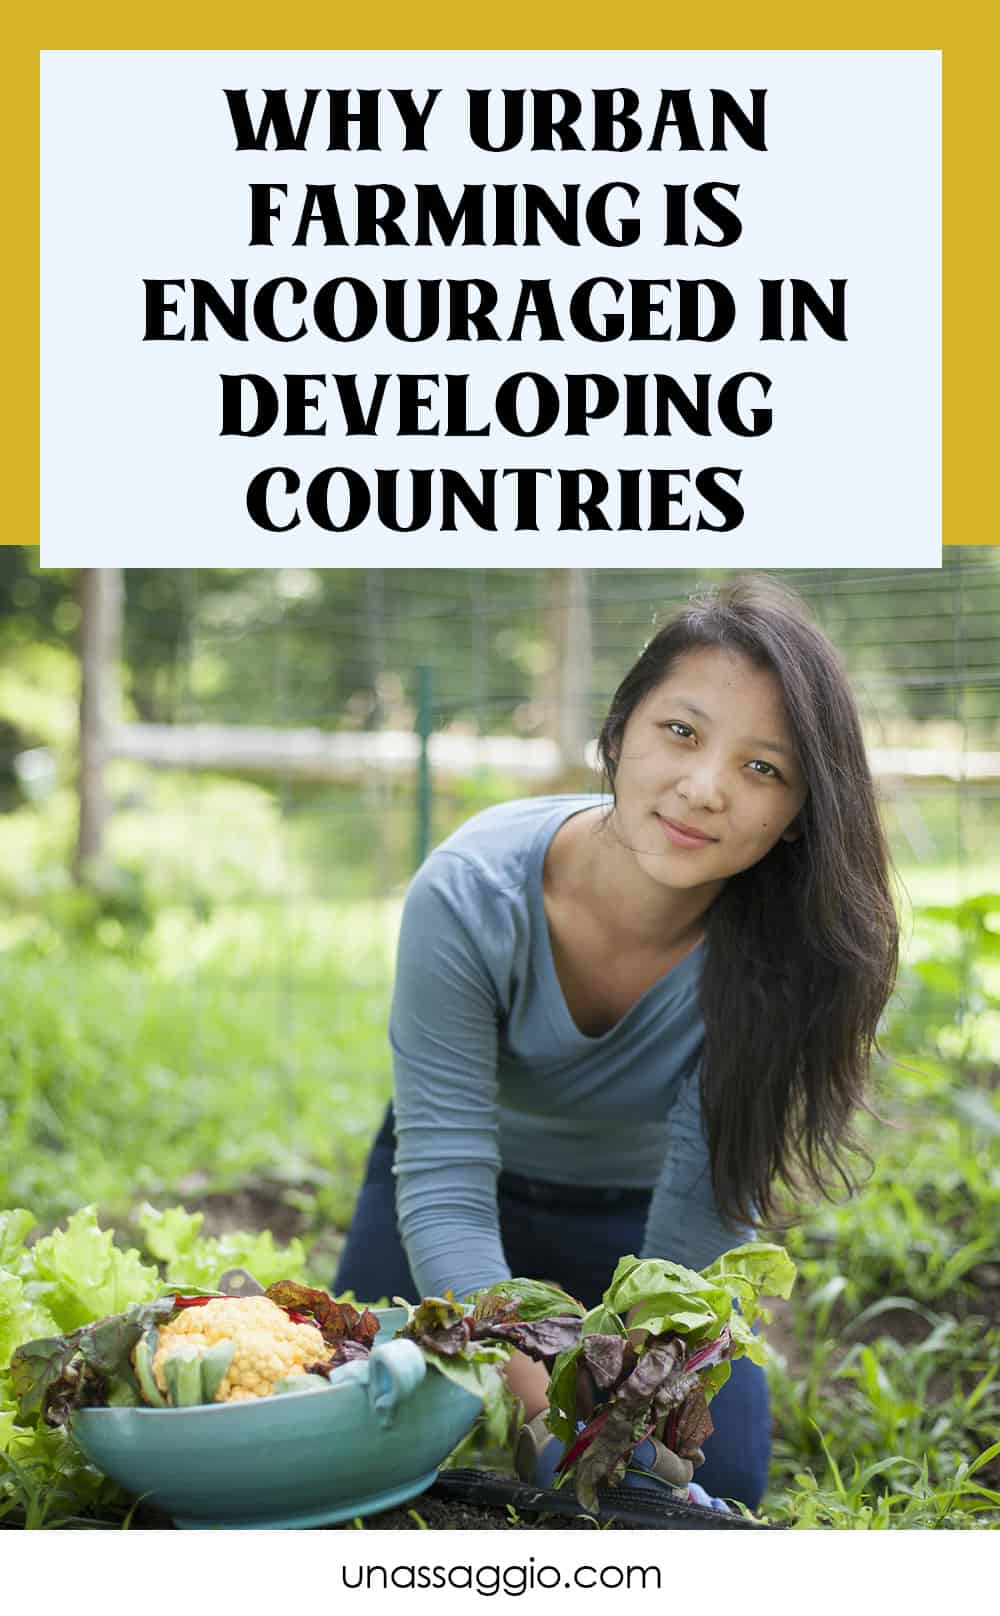 4 Reasons Why Urban Farming Is Encouraged In Developing Countries